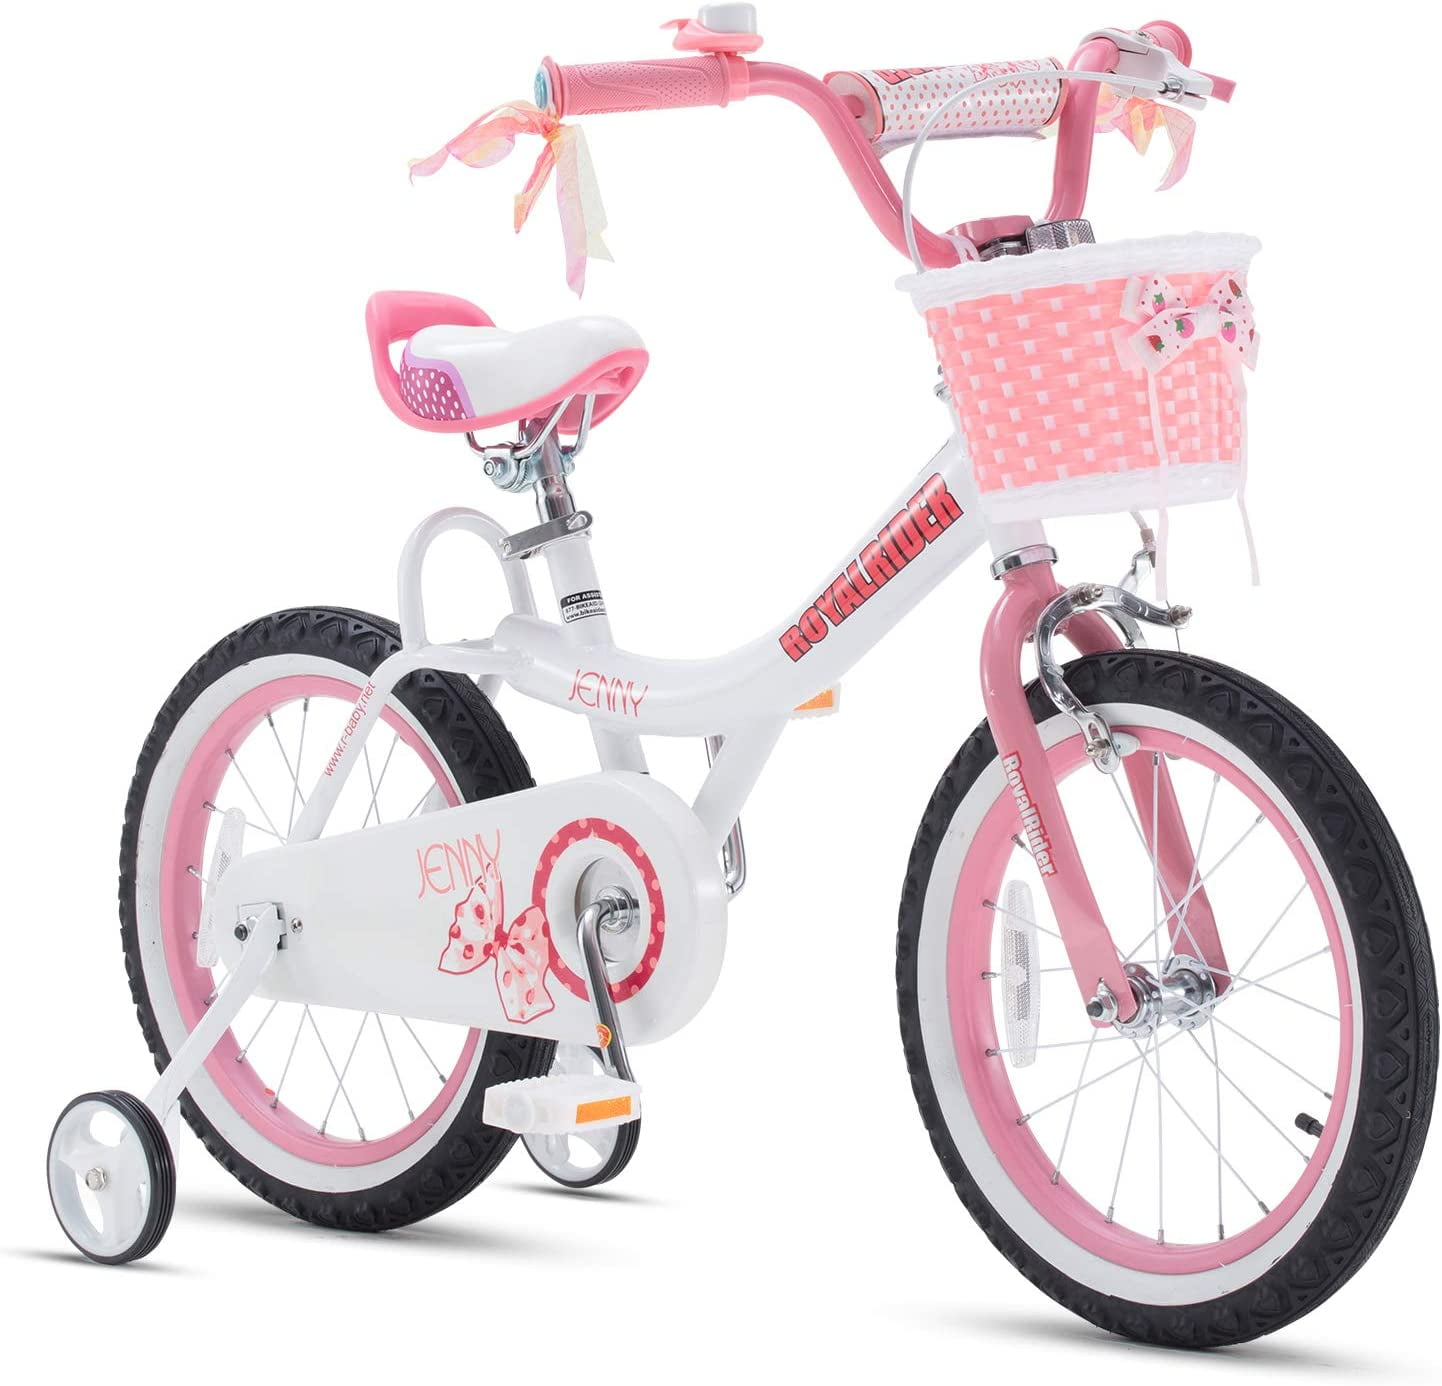 Disney Frozen 12" Girls Bike With Doll Carrier by Huffy Age 3 to 5 Yrs Best Gift for sale online 